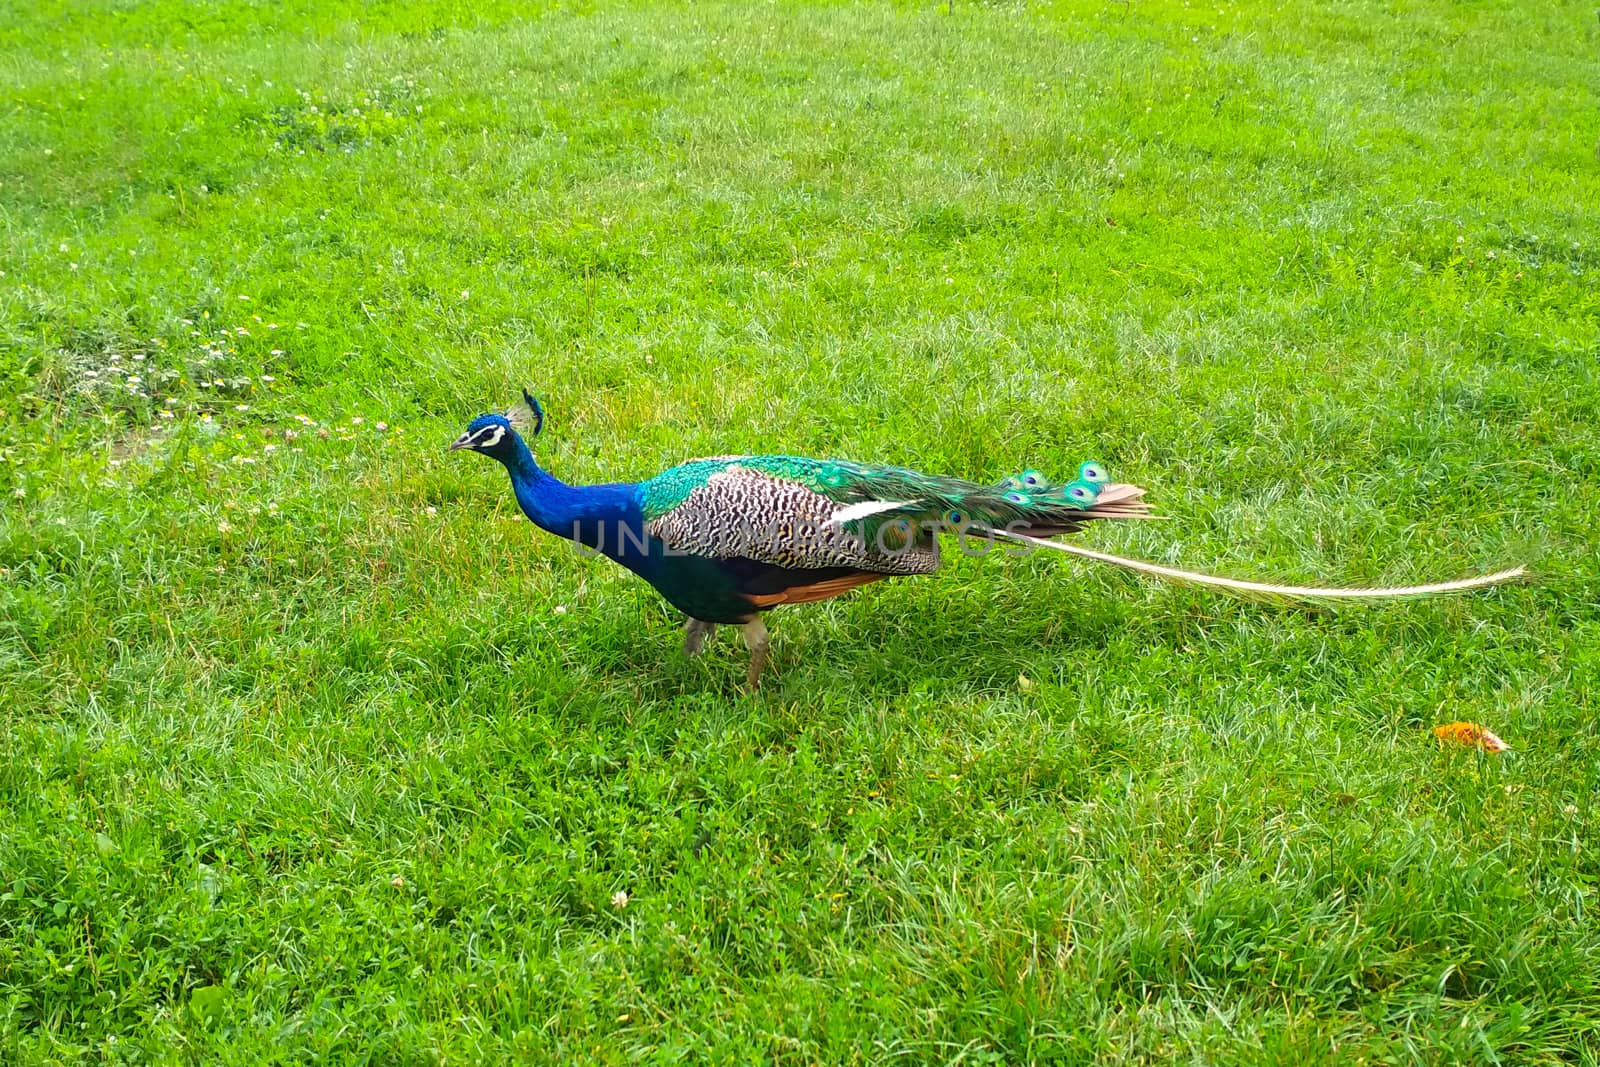 Peacock with a shabby tail on the green grass by mtx